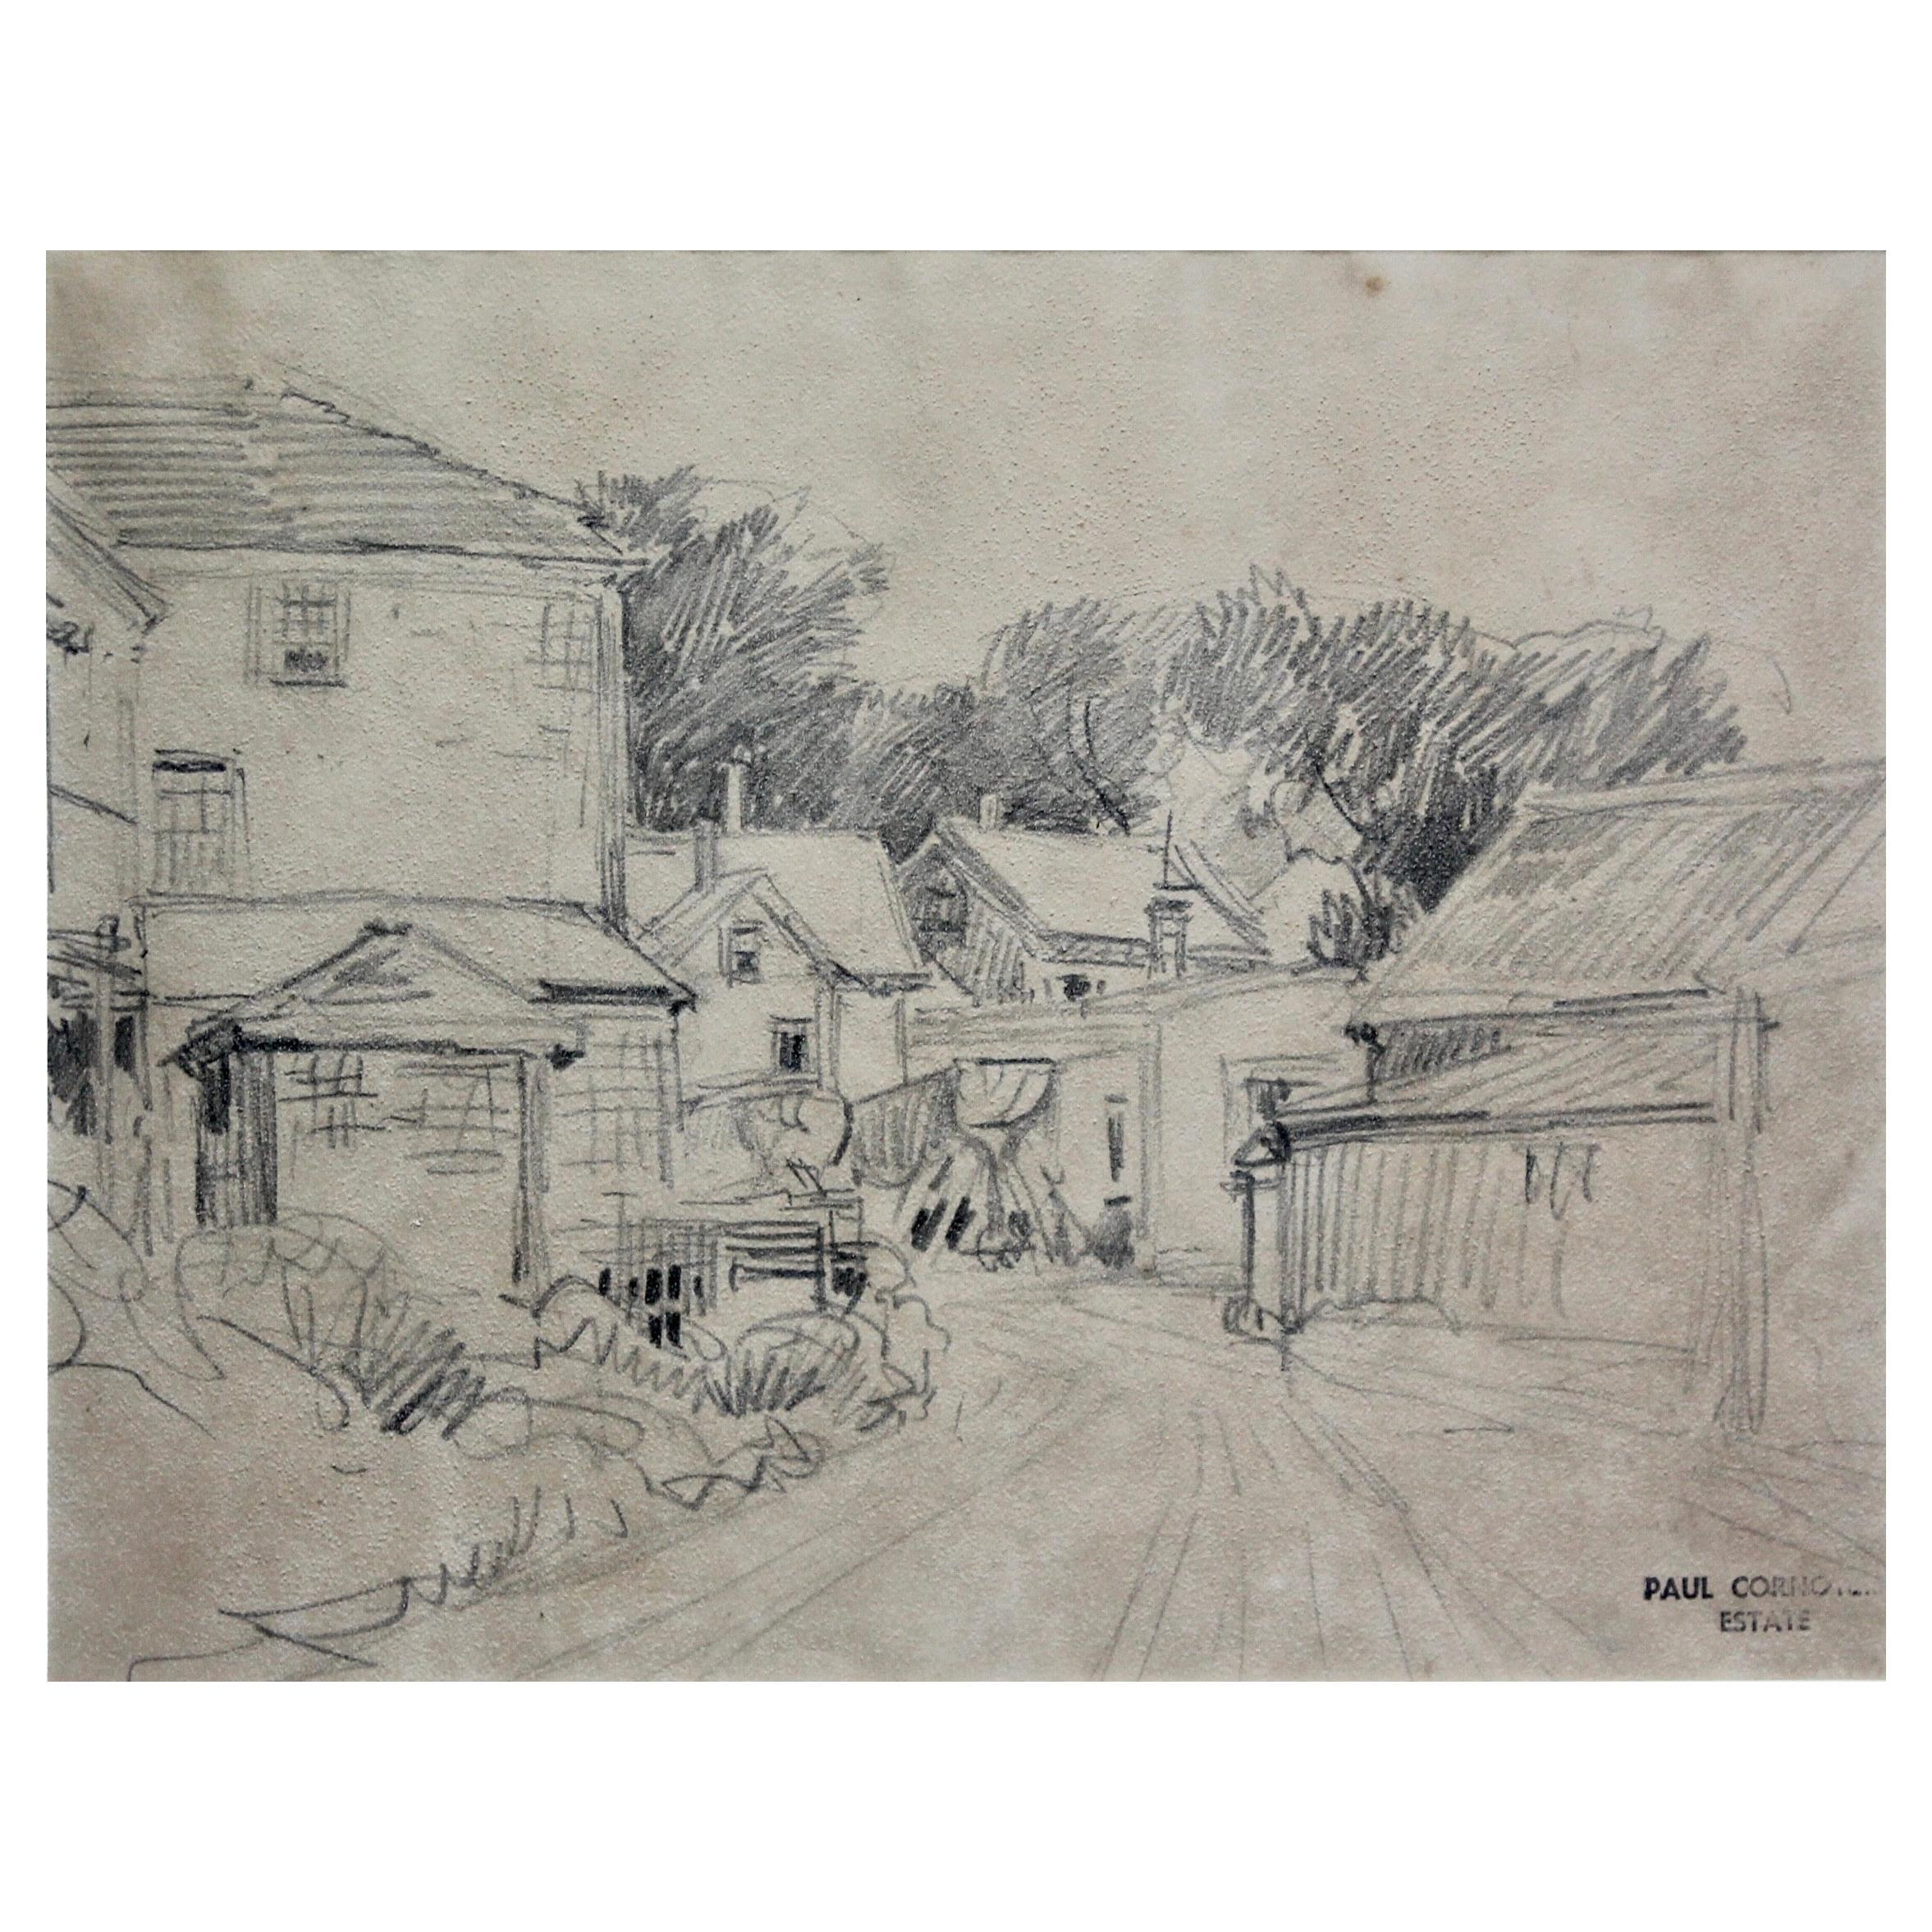 Paul Cornoyer 'Road through a Country Village" For Sale